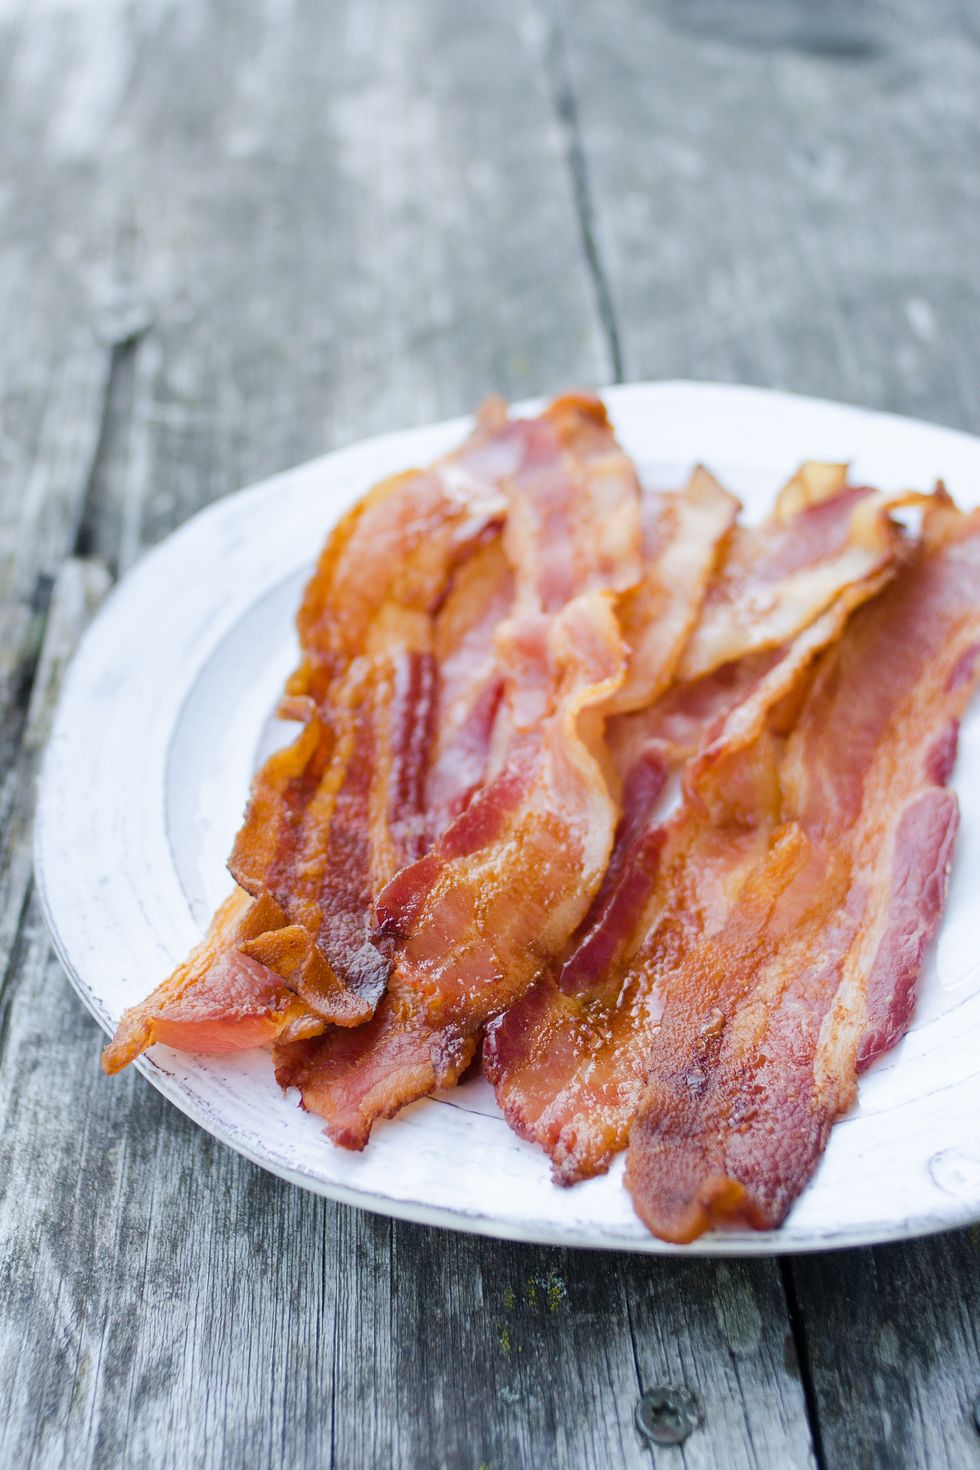 https://hips.hearstapps.com/thepioneerwoman/wp-content/uploads/2015/09/how-to-cook-bacon-in-the-oven-13.jpg?resize=980:*